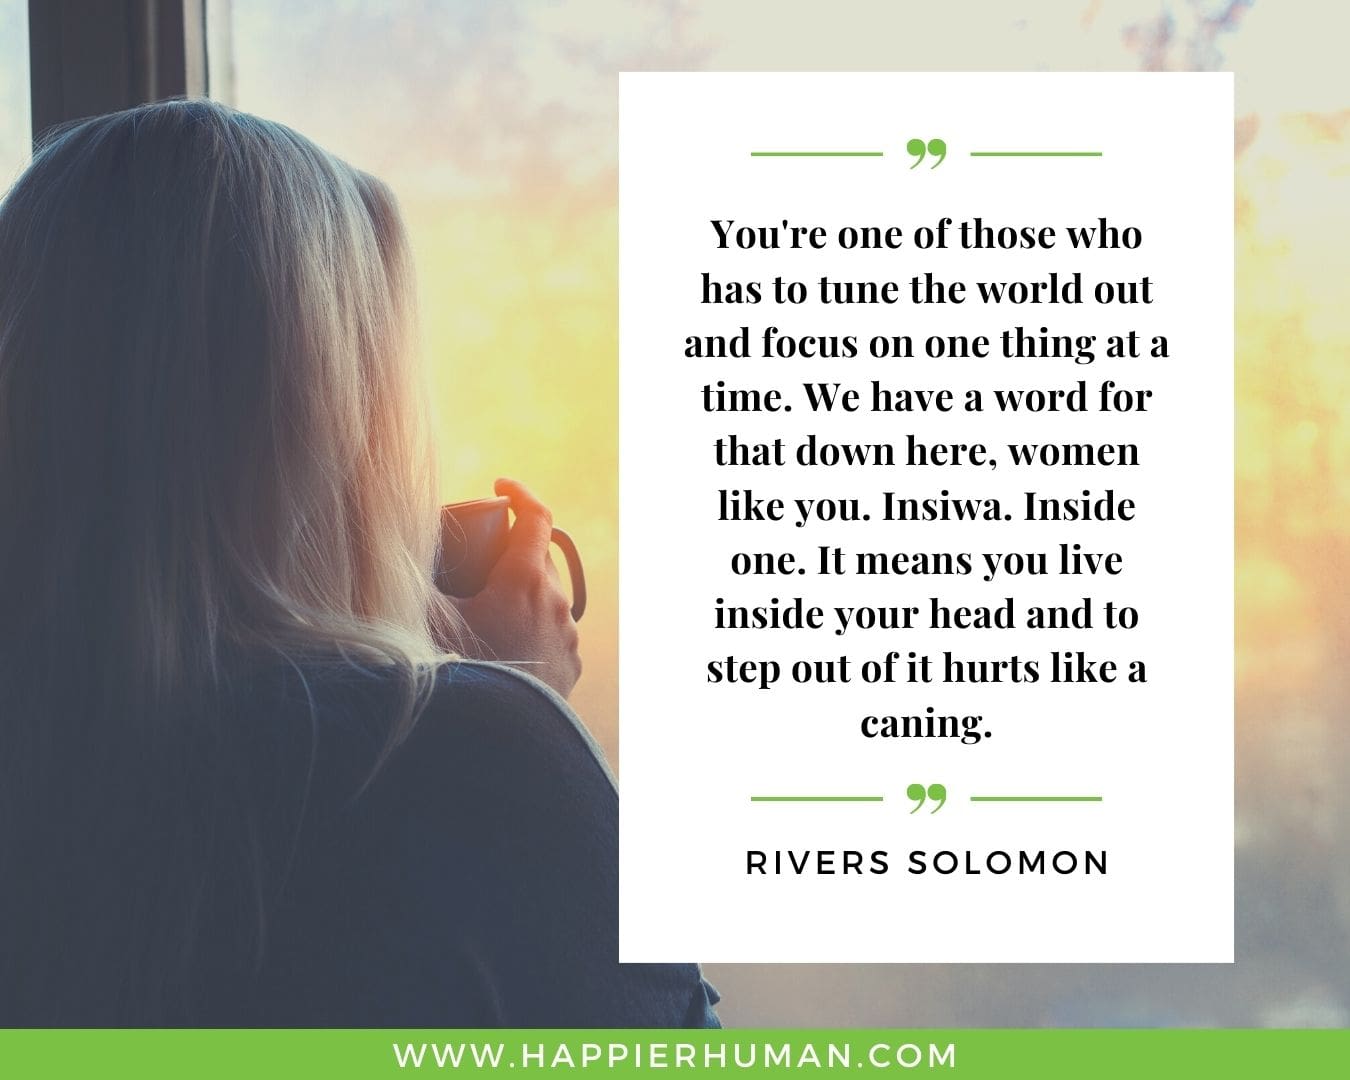 Introvert Quotes - “You're one of those who has to tune the world out and focus on one thing at a time. We have a word for that down here, women like you. Insiwa. Inside one. It means you live inside your head and to step out of it hurts like a caning.” – Rivers Solomon